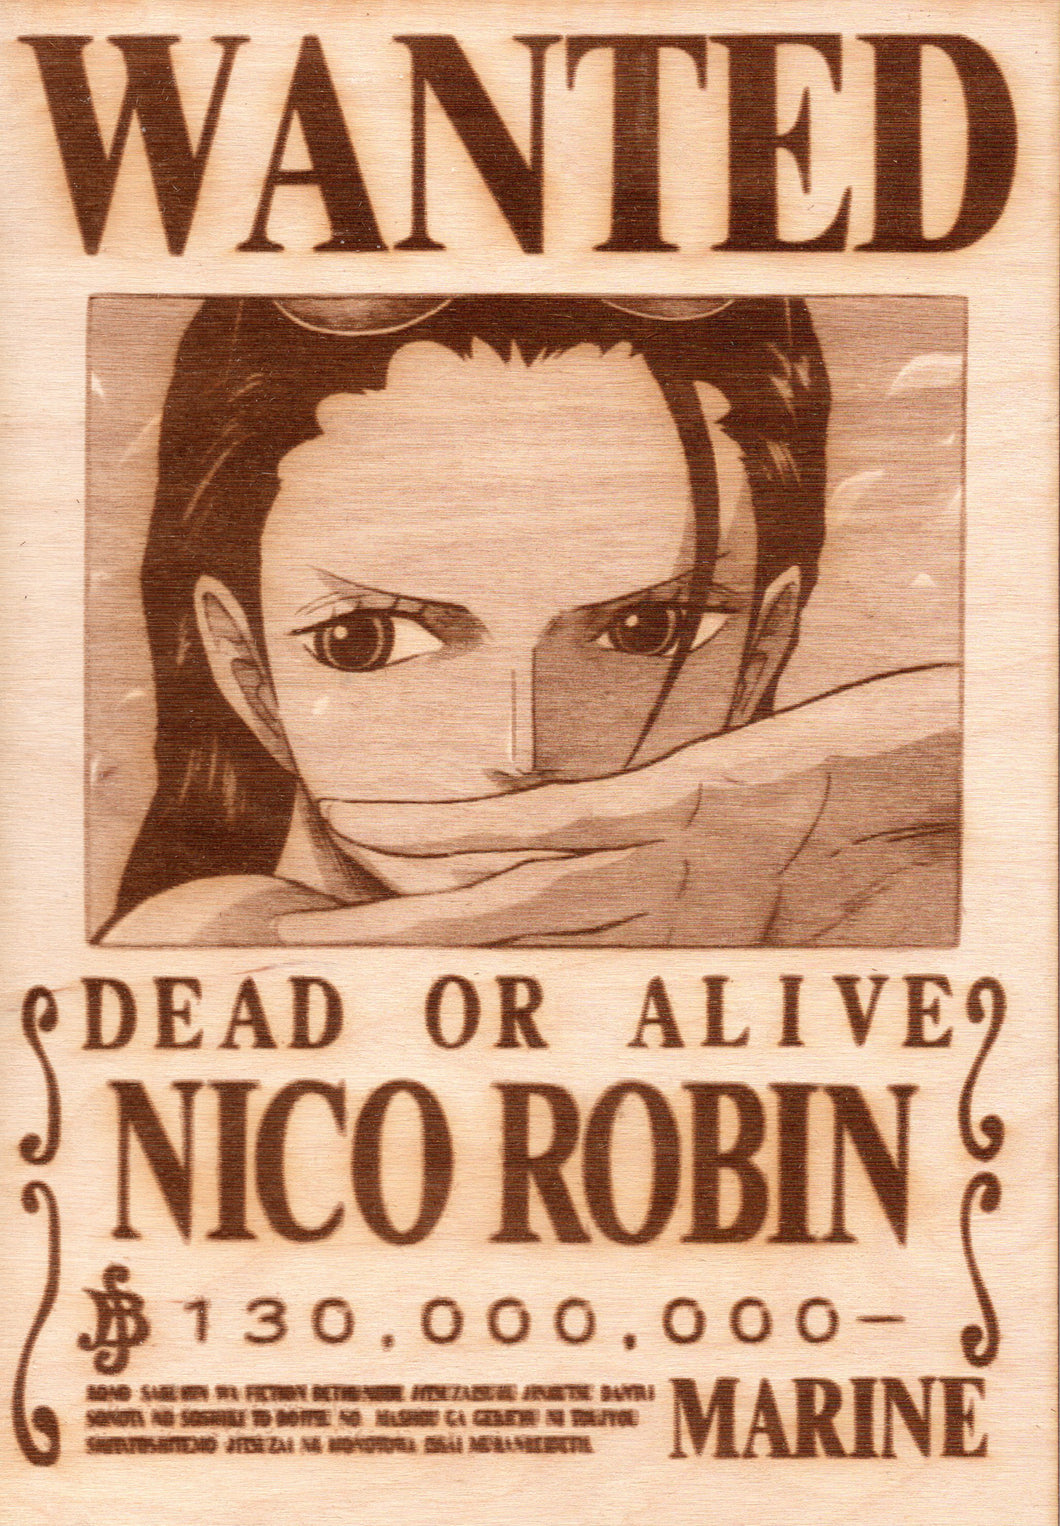 One Piece - Nico Robin Wooden Wanted Poster - TantrumCollectibles.com